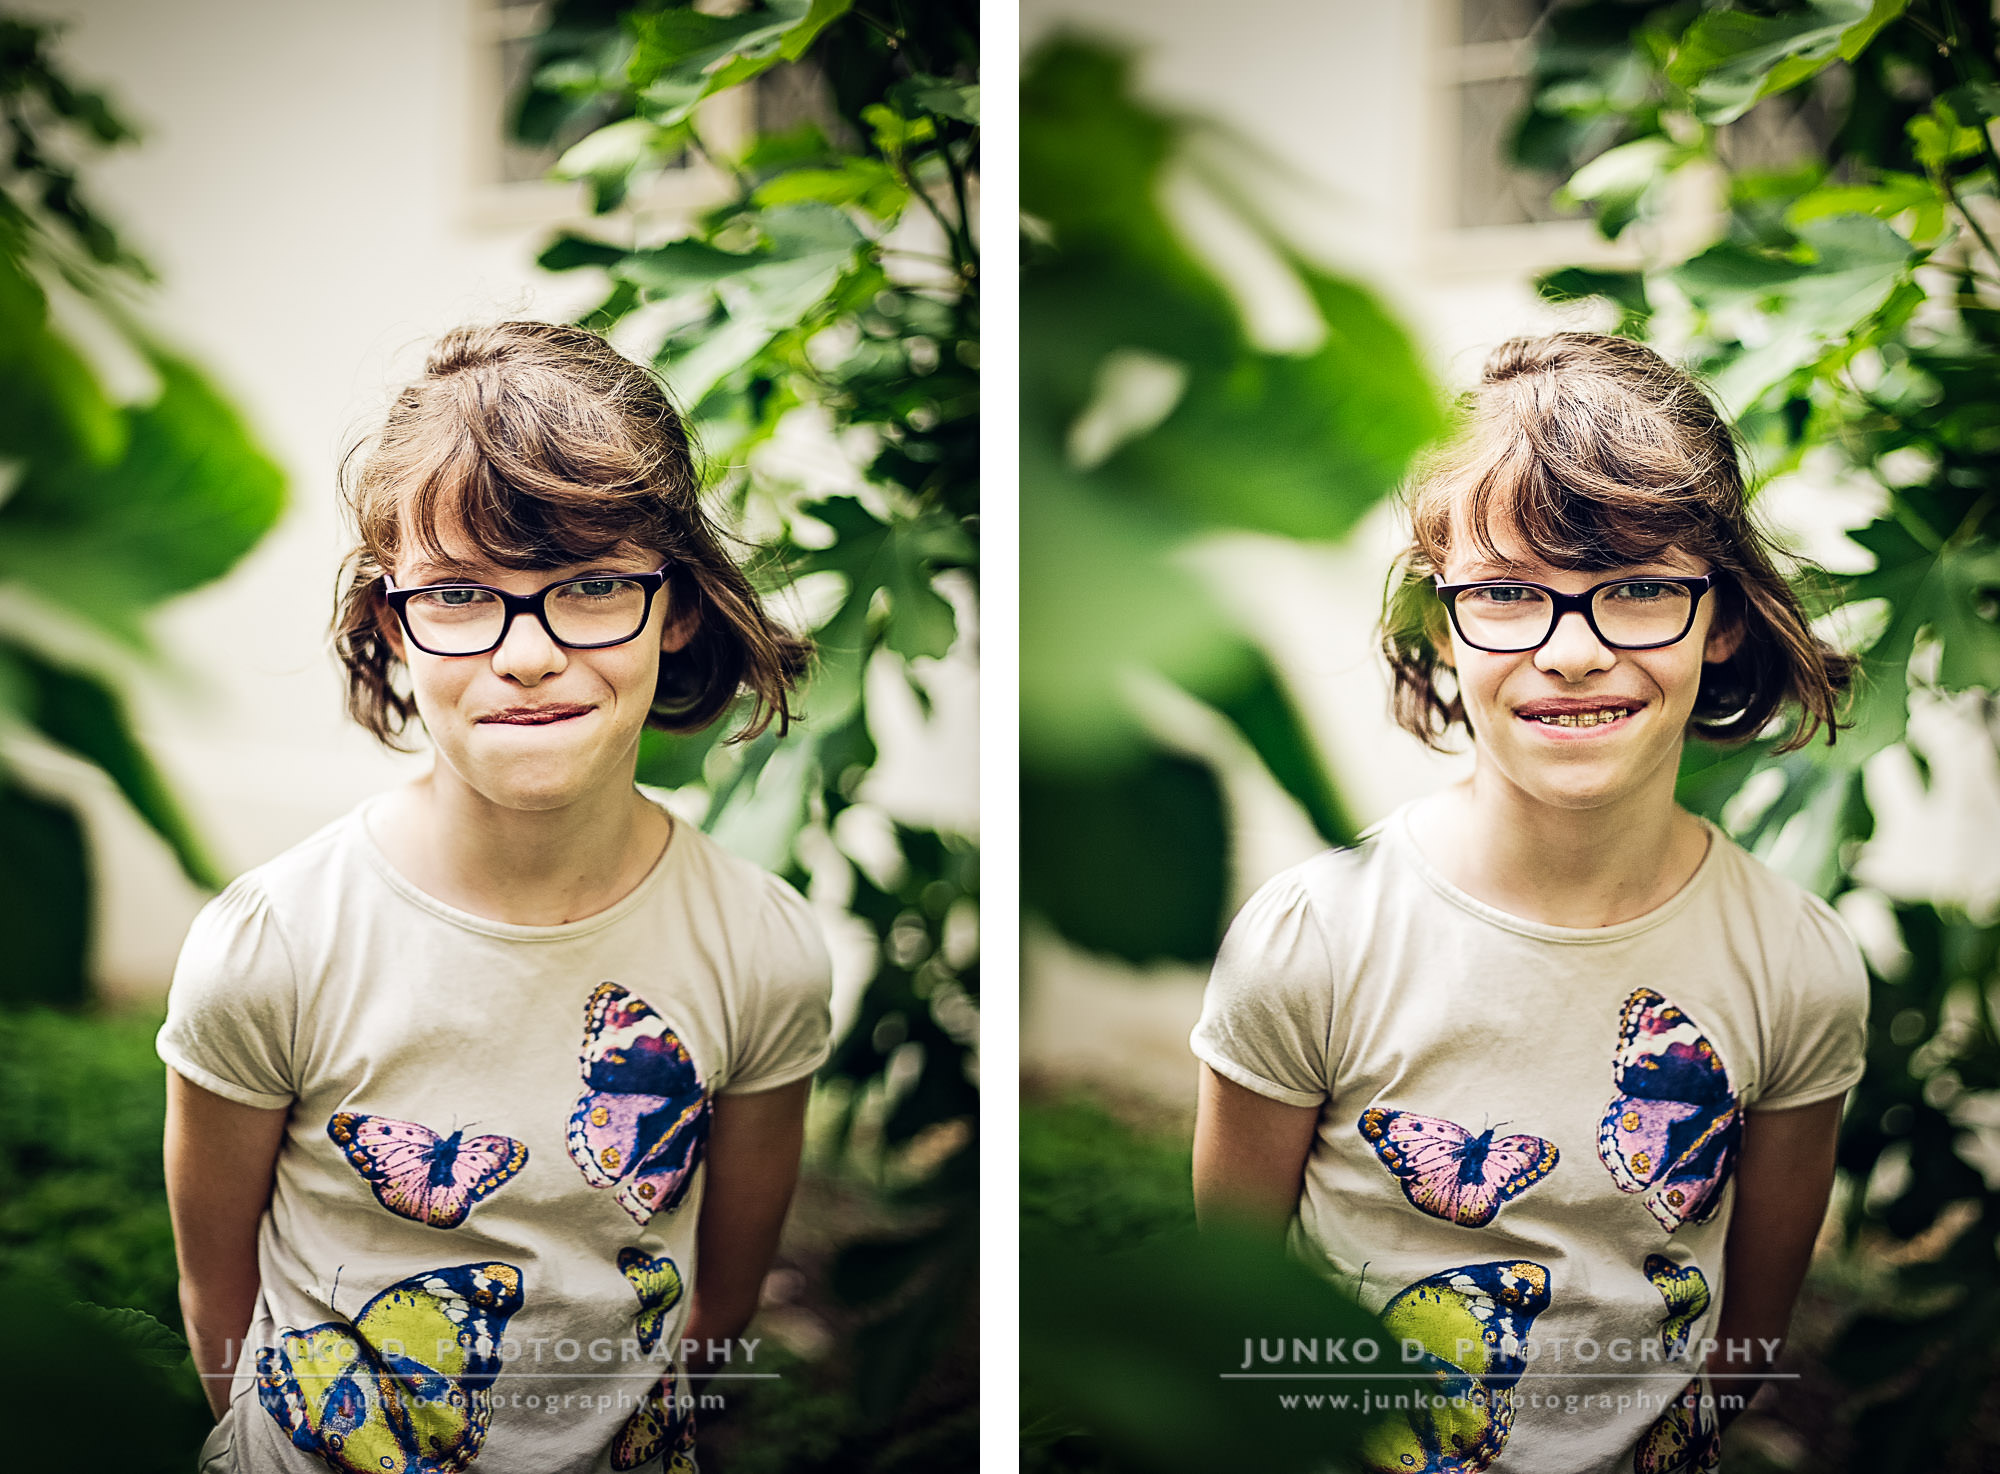 Children Photography by Junko d. Photography